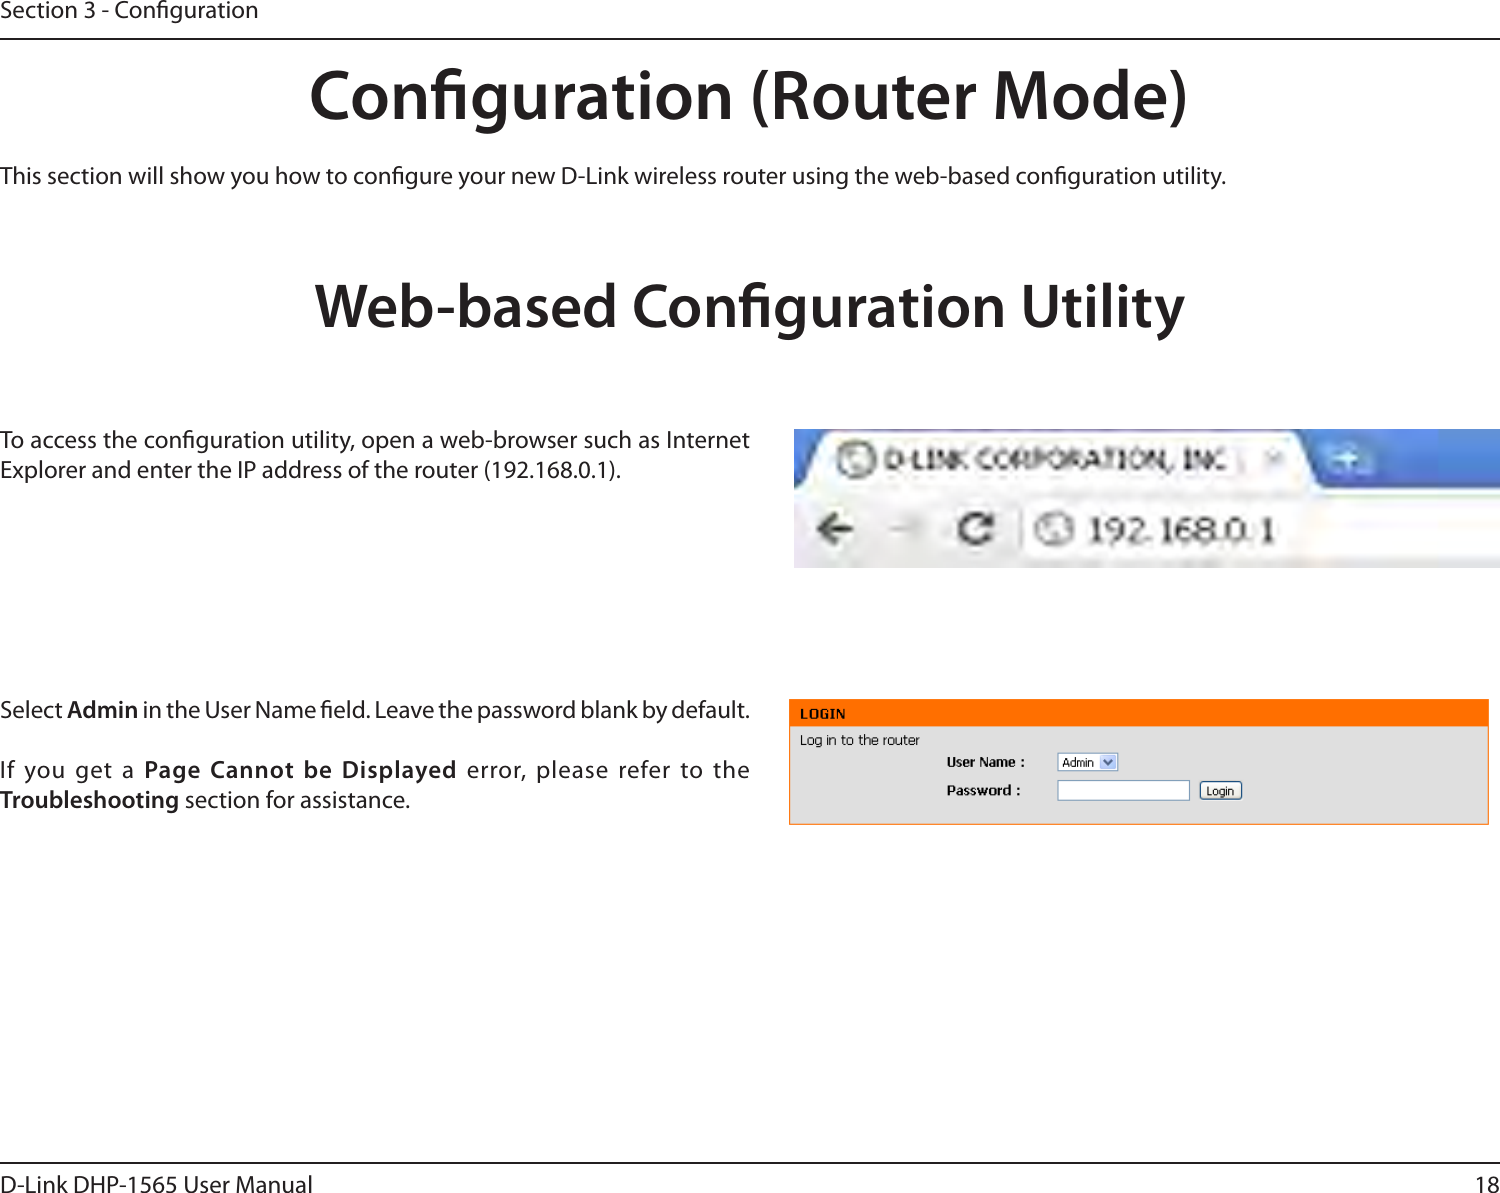 18D-Link DHP-1565 User ManualSection 3 - CongurationConguration (Router Mode)This section will show you how to congure your new D-Link wireless router using the web-based conguration utility.Web-based Conguration UtilityTo access the conguration utility, open a web-browser such as Internet Explorer and enter the IP address of the router (192.168.0.1).Select Admin in the User Name eld. Leave the password blank by default. If you get a Page Cannot be Displayed error, please refer to the Troubleshooting section for assistance.